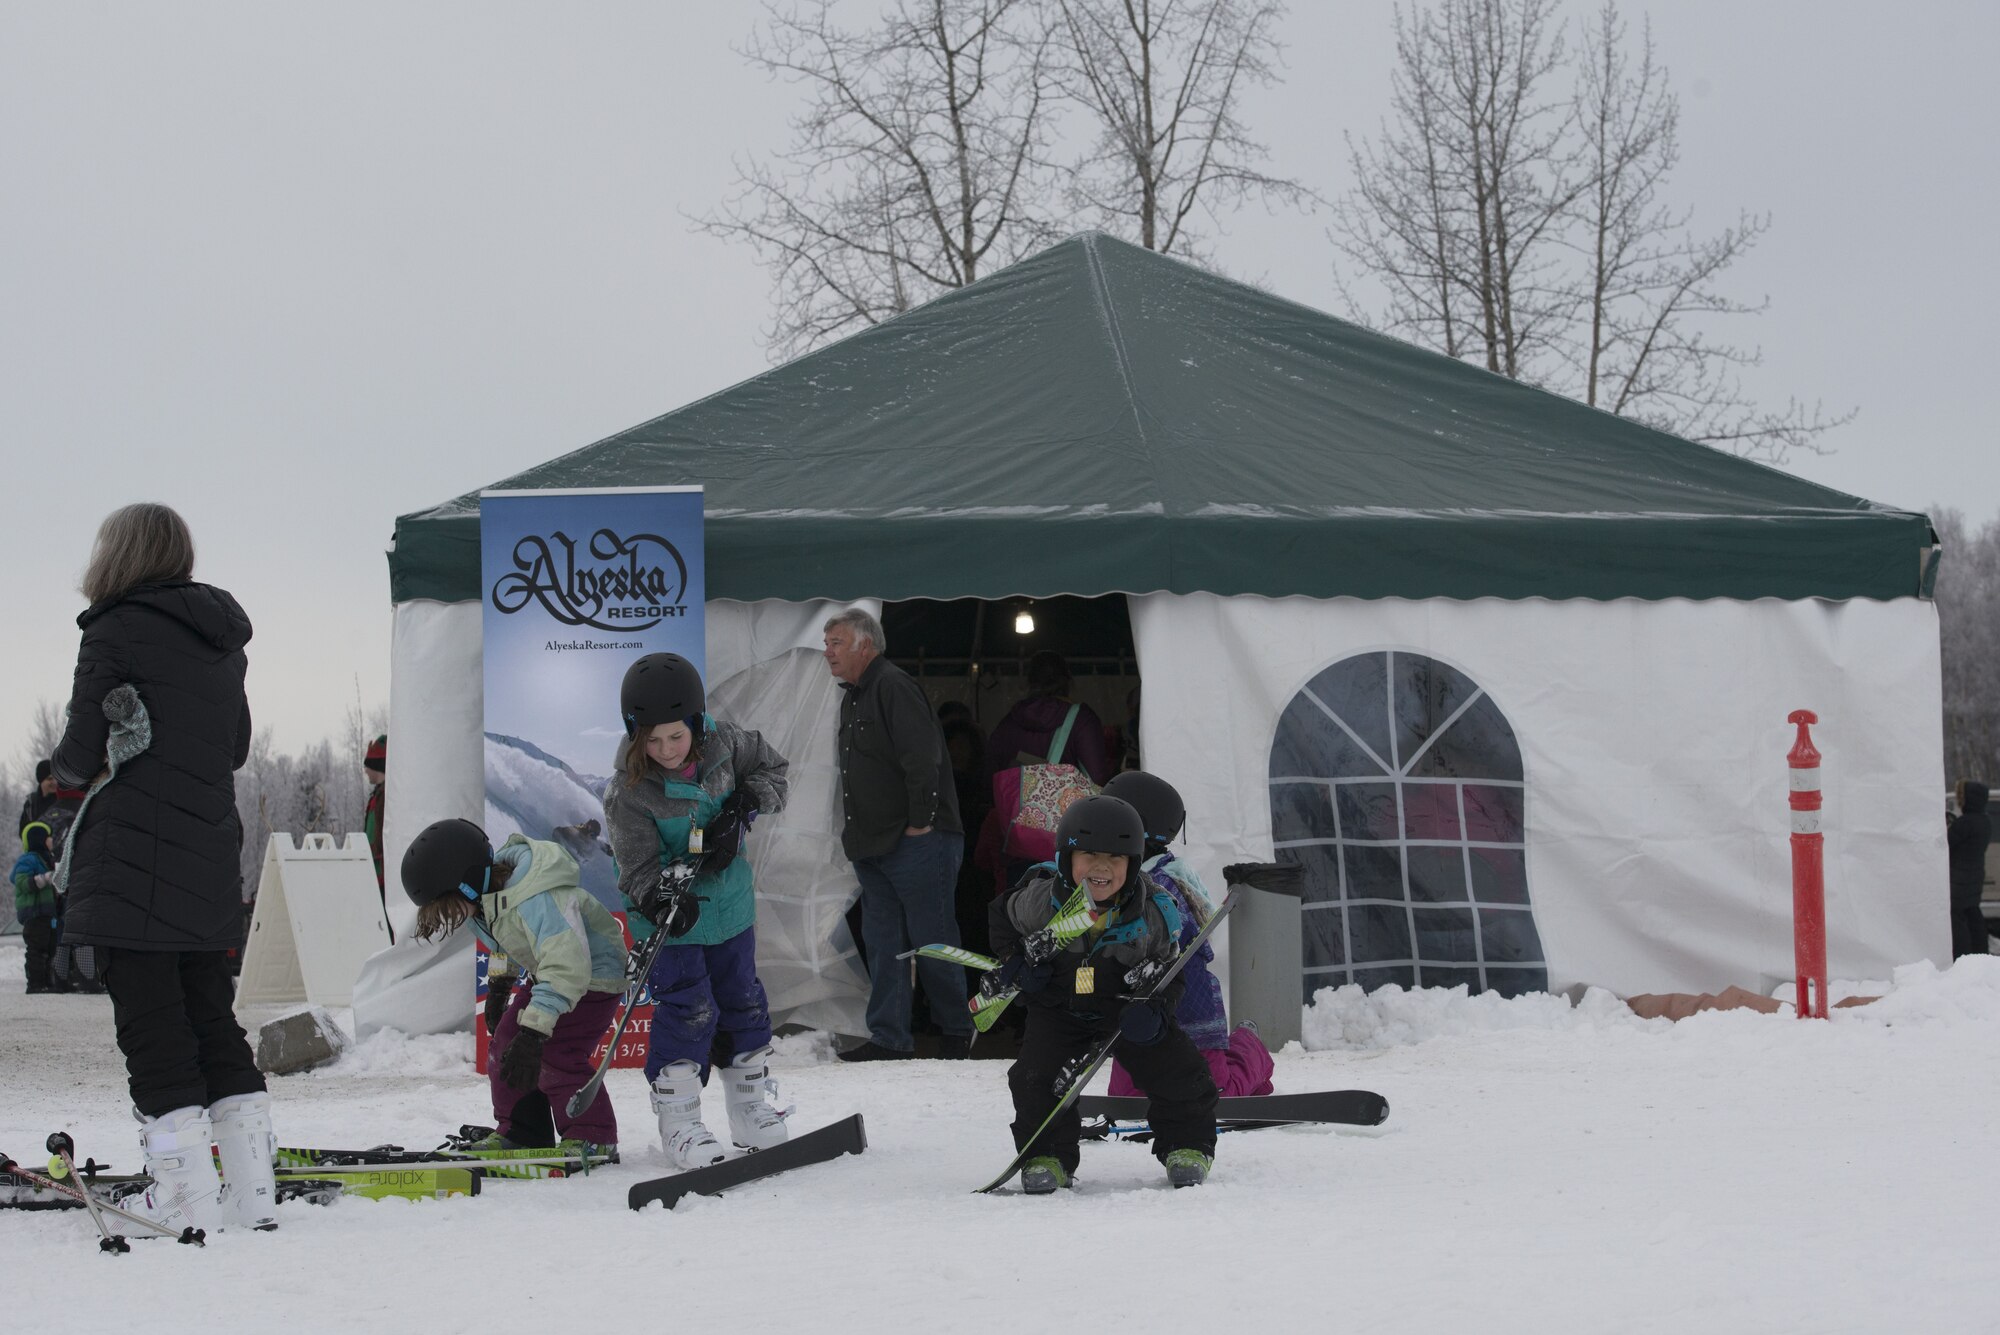 Children put on their skis outside a concessions tent at the Hillberg Ski Area during Winterfest at Joint Base Elmendorf-Richardson, Alaska, Dec. 21, 2017. Winterfest was a winter solstice celebration hosted by Hillberg for anyone with base access and offered a plethora of events from noon to as late at 8 p.m.